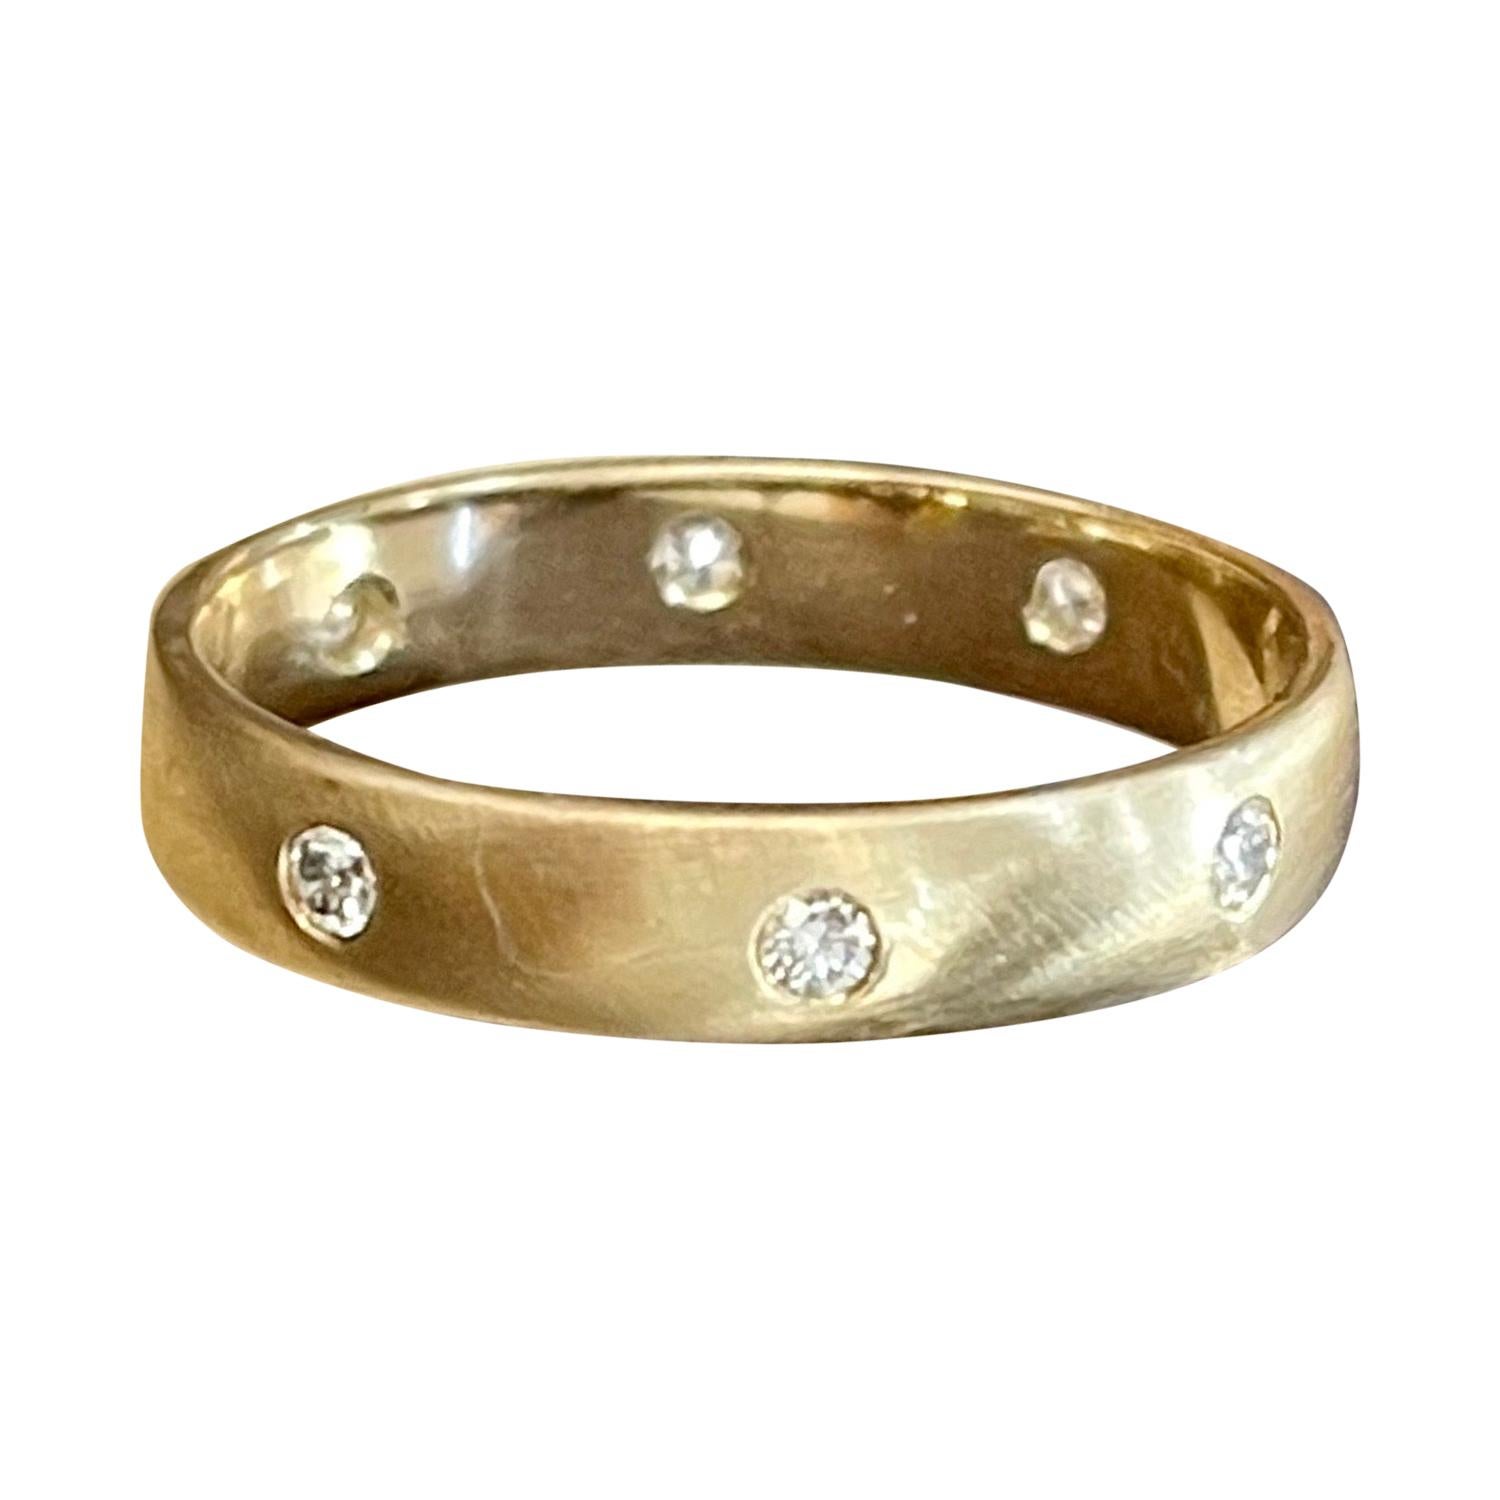 8 Flush Set Bezel Diamond Eternity Wedding Band in 14 Karat Yellow Gold Size 11
All 8 diamonds are scattered uniformly all around the band 
Very clean and shiny diamonds.
5 pointer diamonds are used 
total weight of the diamond is 0.40ct
This